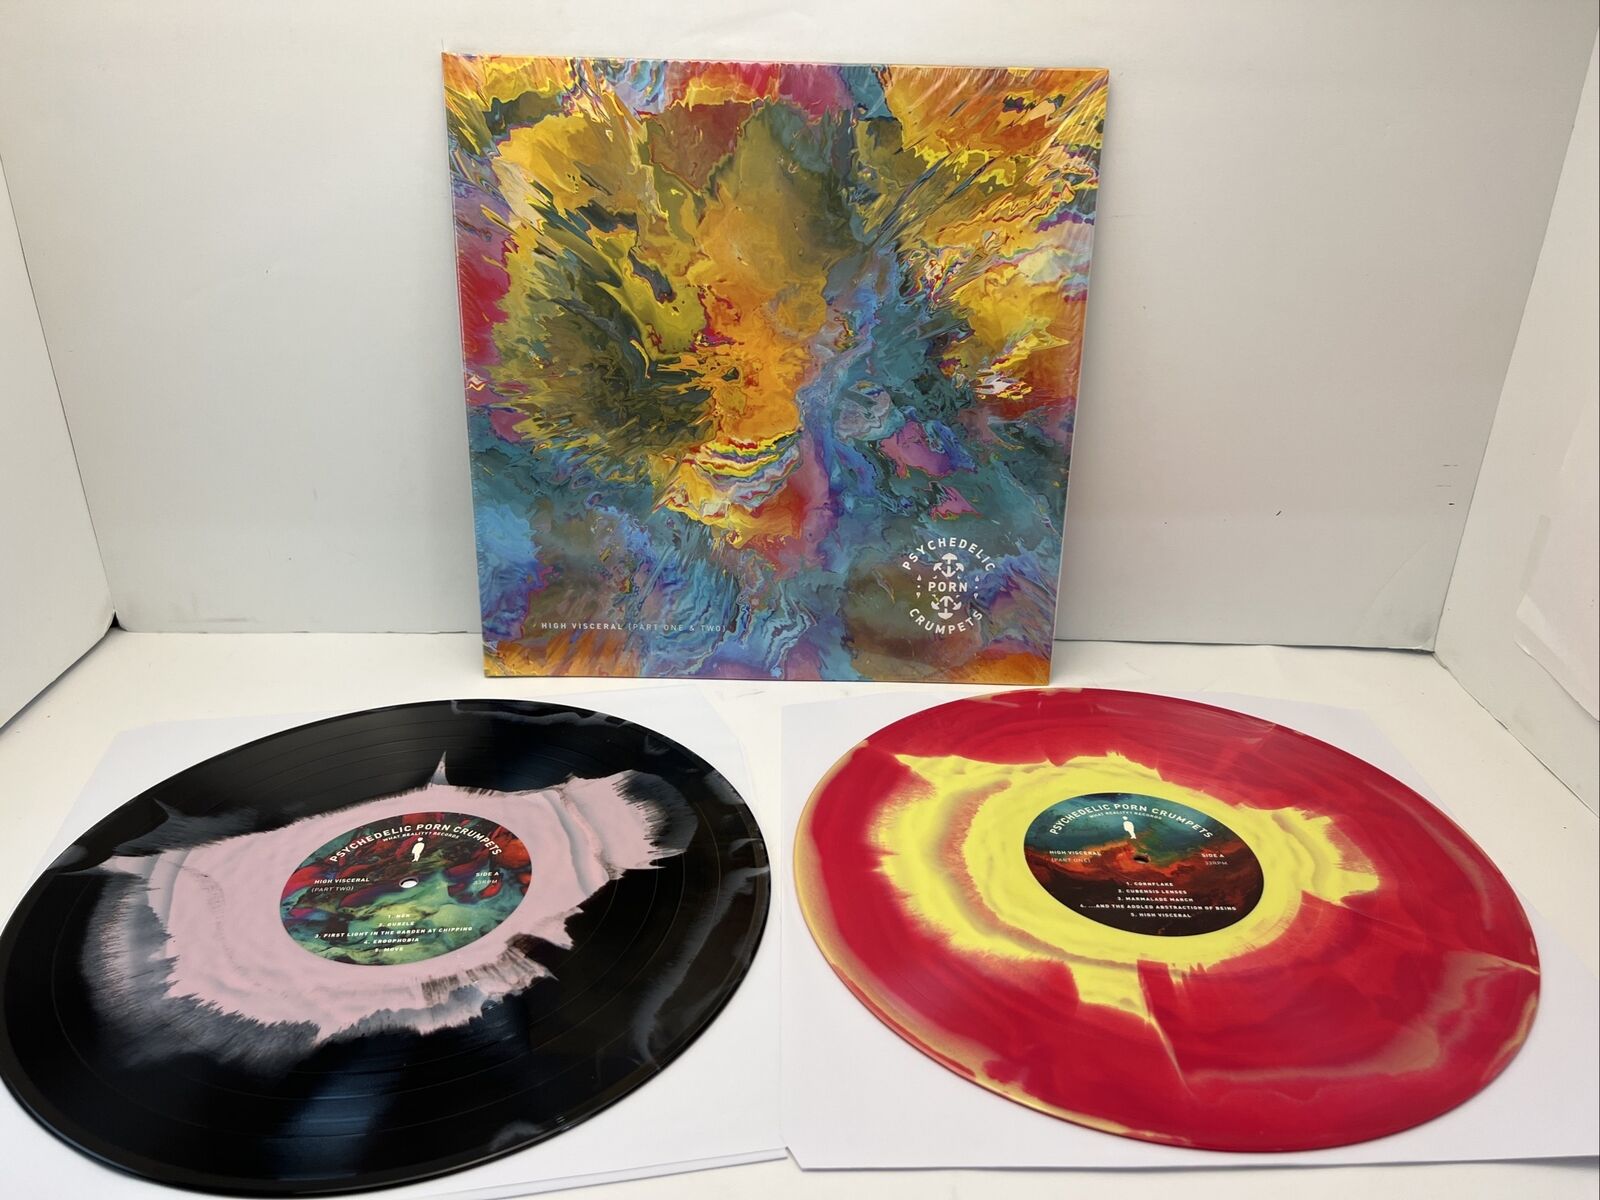 Psychedelic Porn Crumpets - High Visceral Part 1+2  Limited Vinyl Record LP